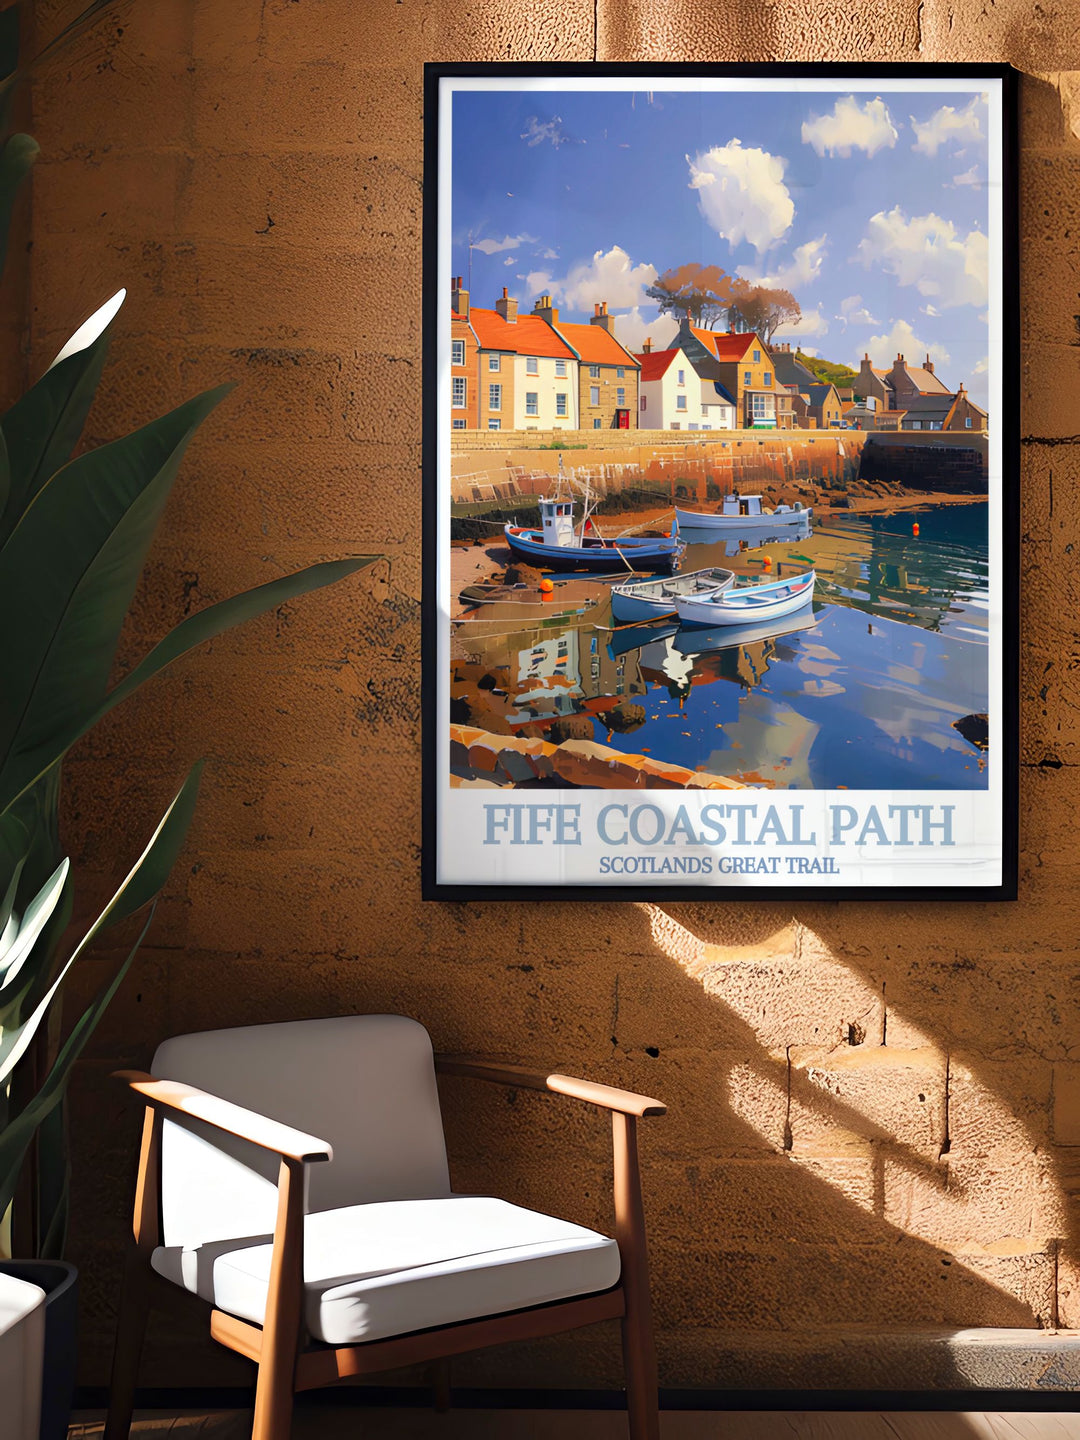 This art print of the Fife Coastal Path captures the rugged cliffs and lush green surroundings, making it a standout piece for any decor.